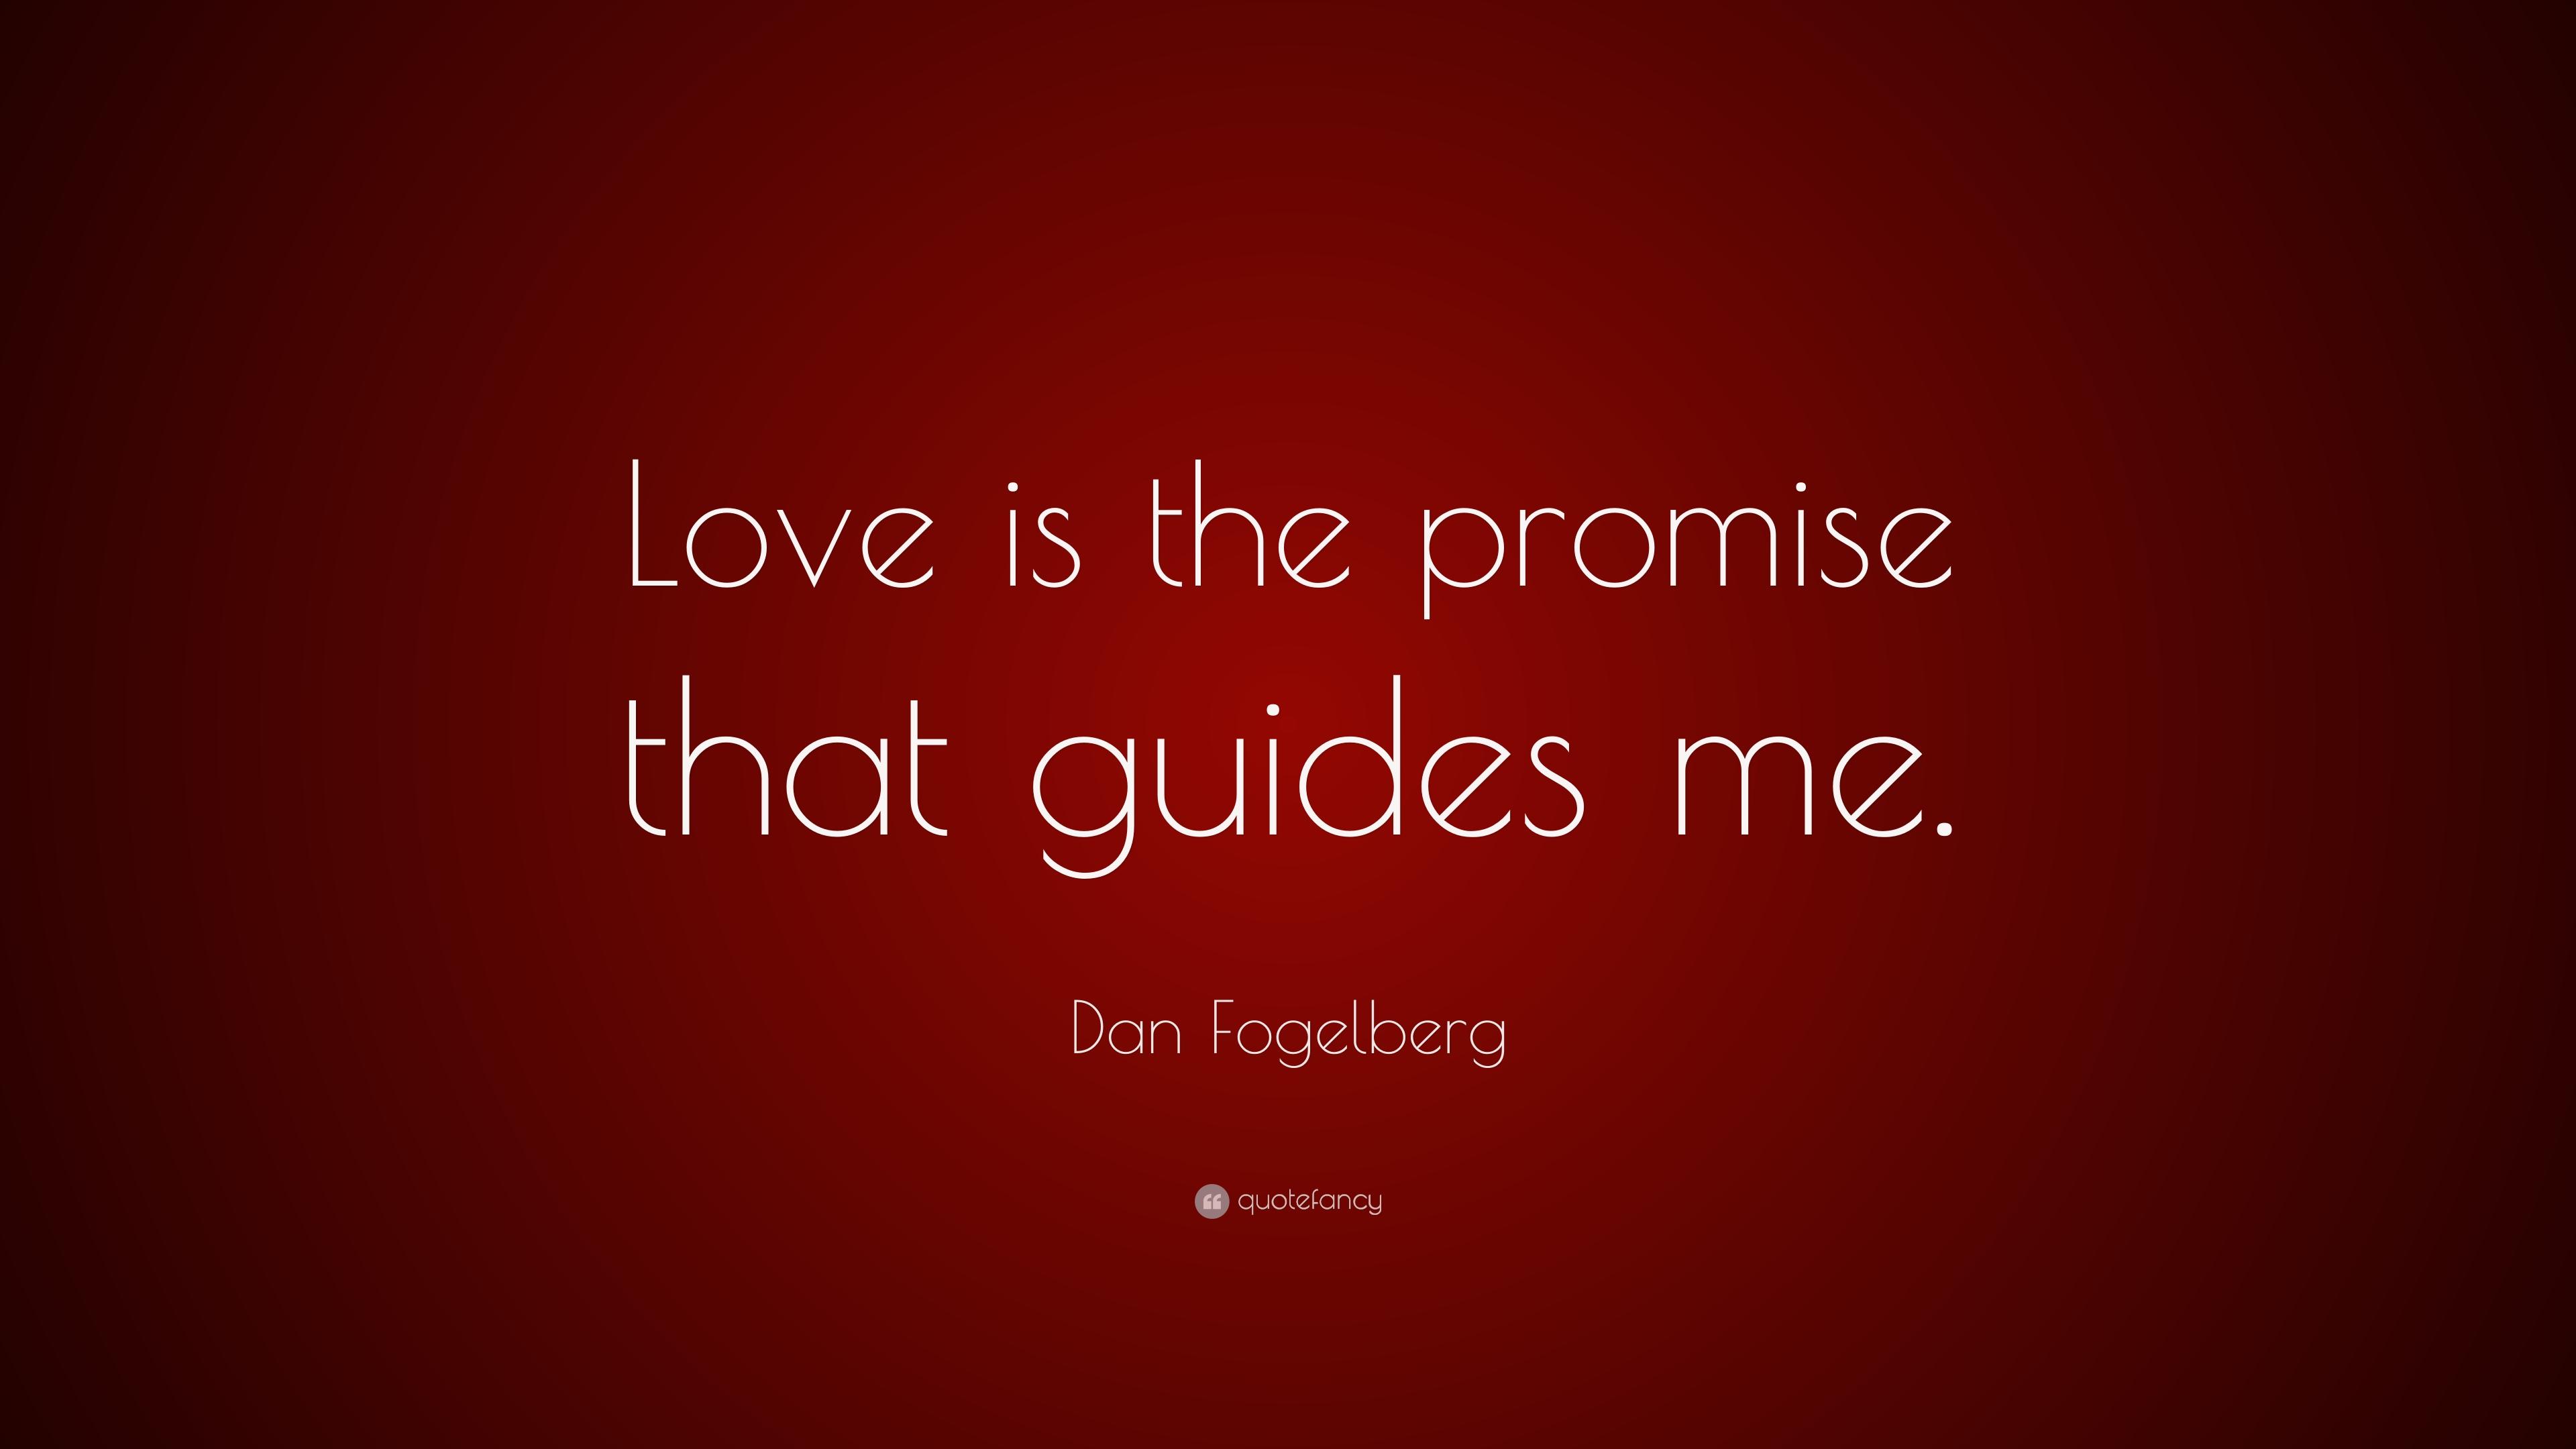 Dan Fogelberg Quote: “Love is the promise that guides me.” 7